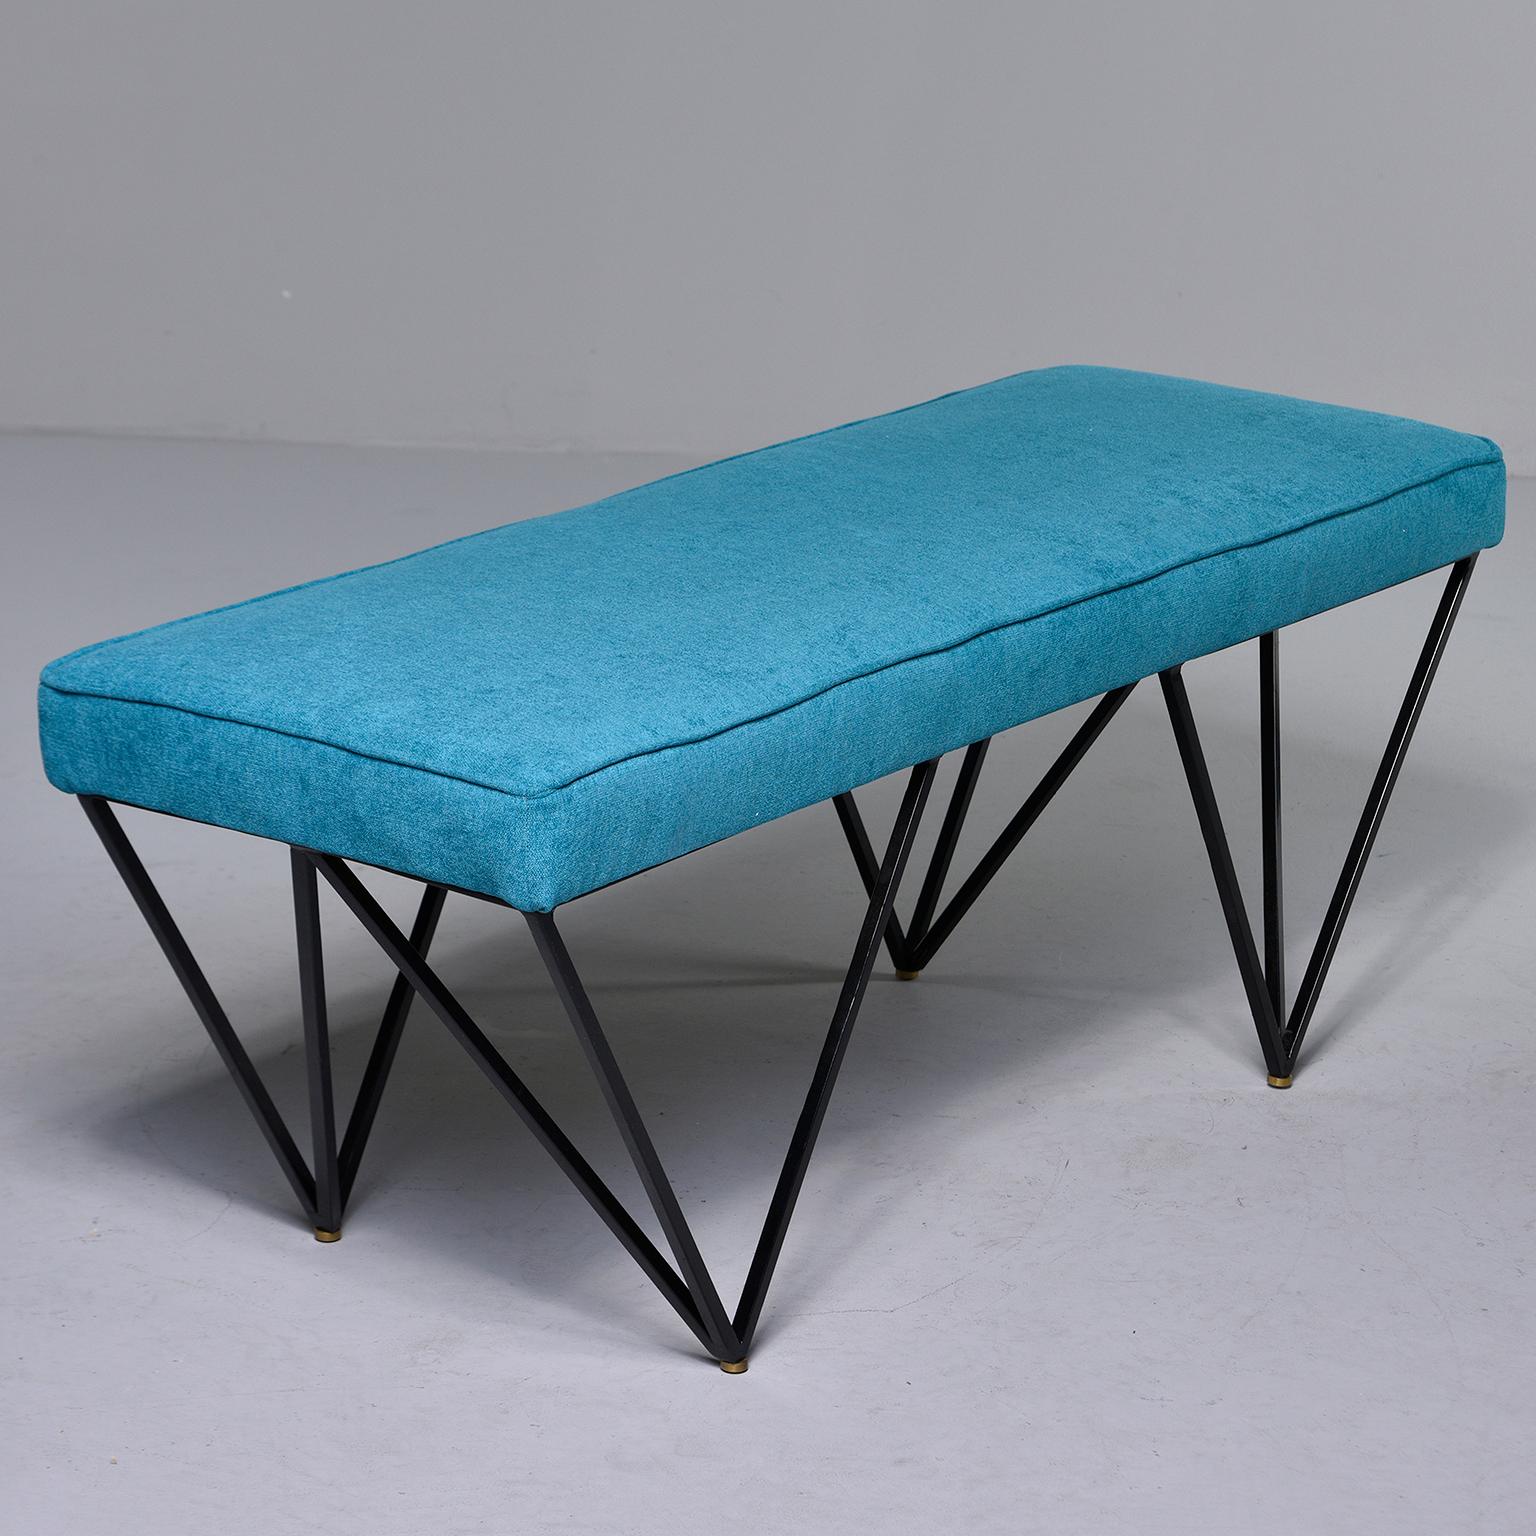 Italian Midcentury Style Bench with Teal Fabric and Black Metal Legs 1